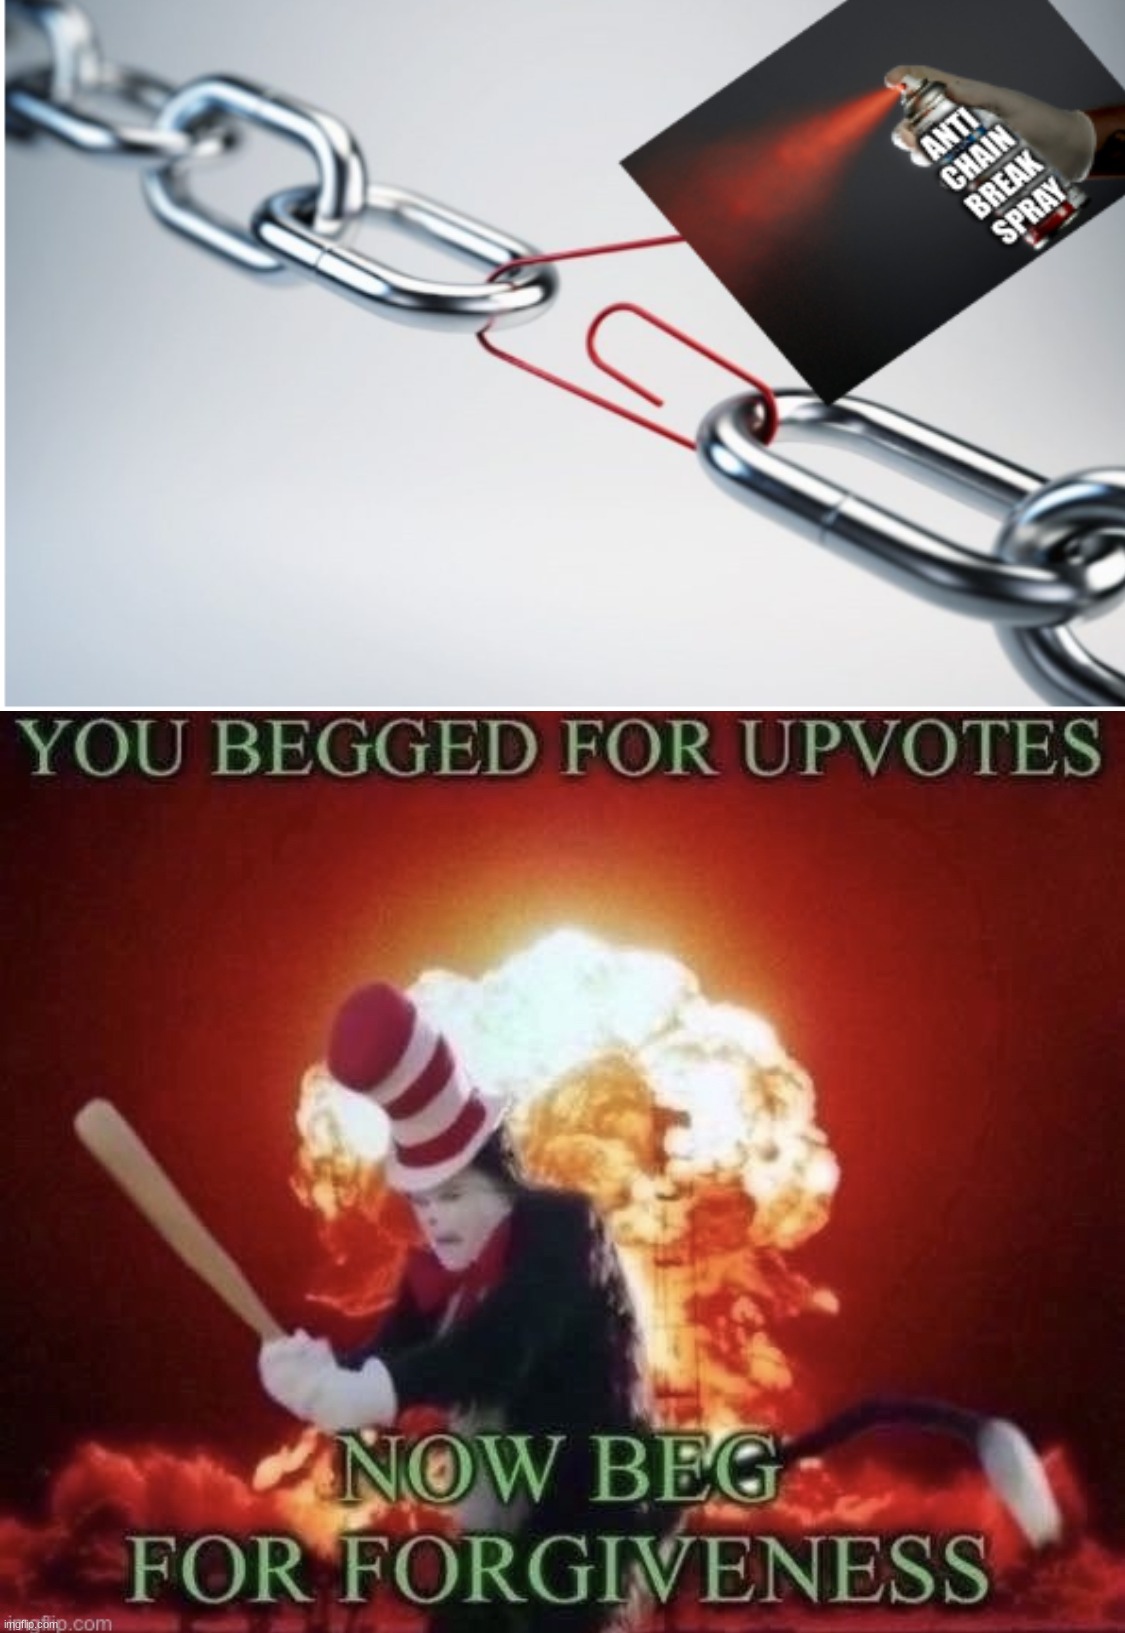 Anti Upvote Beggar | image tagged in beg for forgiveness,stop upvote begging,stop reading these tags,stop reading,the tags,just use the image | made w/ Imgflip meme maker